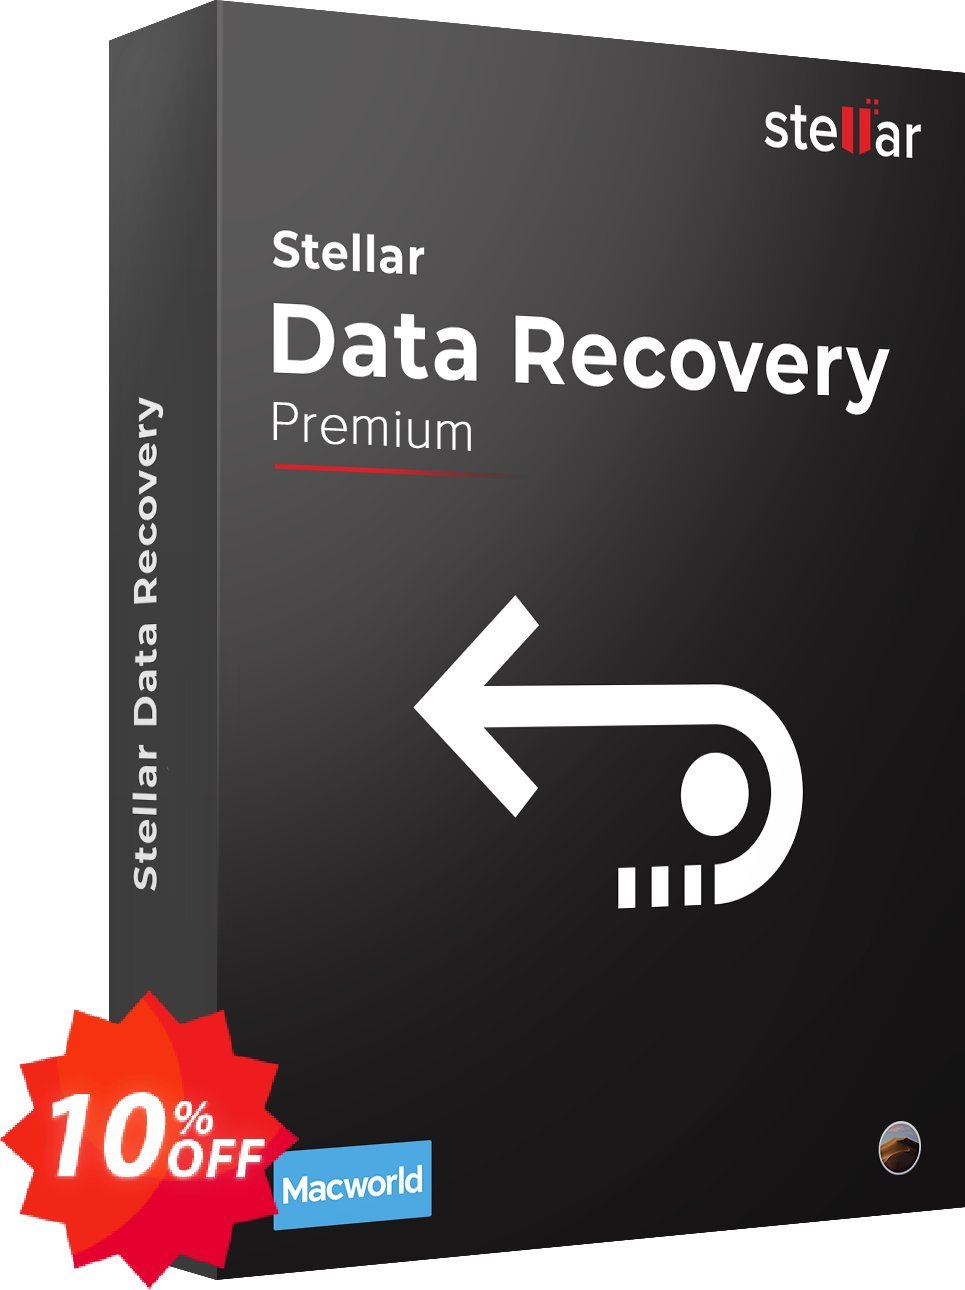 Stellar Data Recovery Premium for MAC, 2 Year Subscription  Coupon code 10% discount 